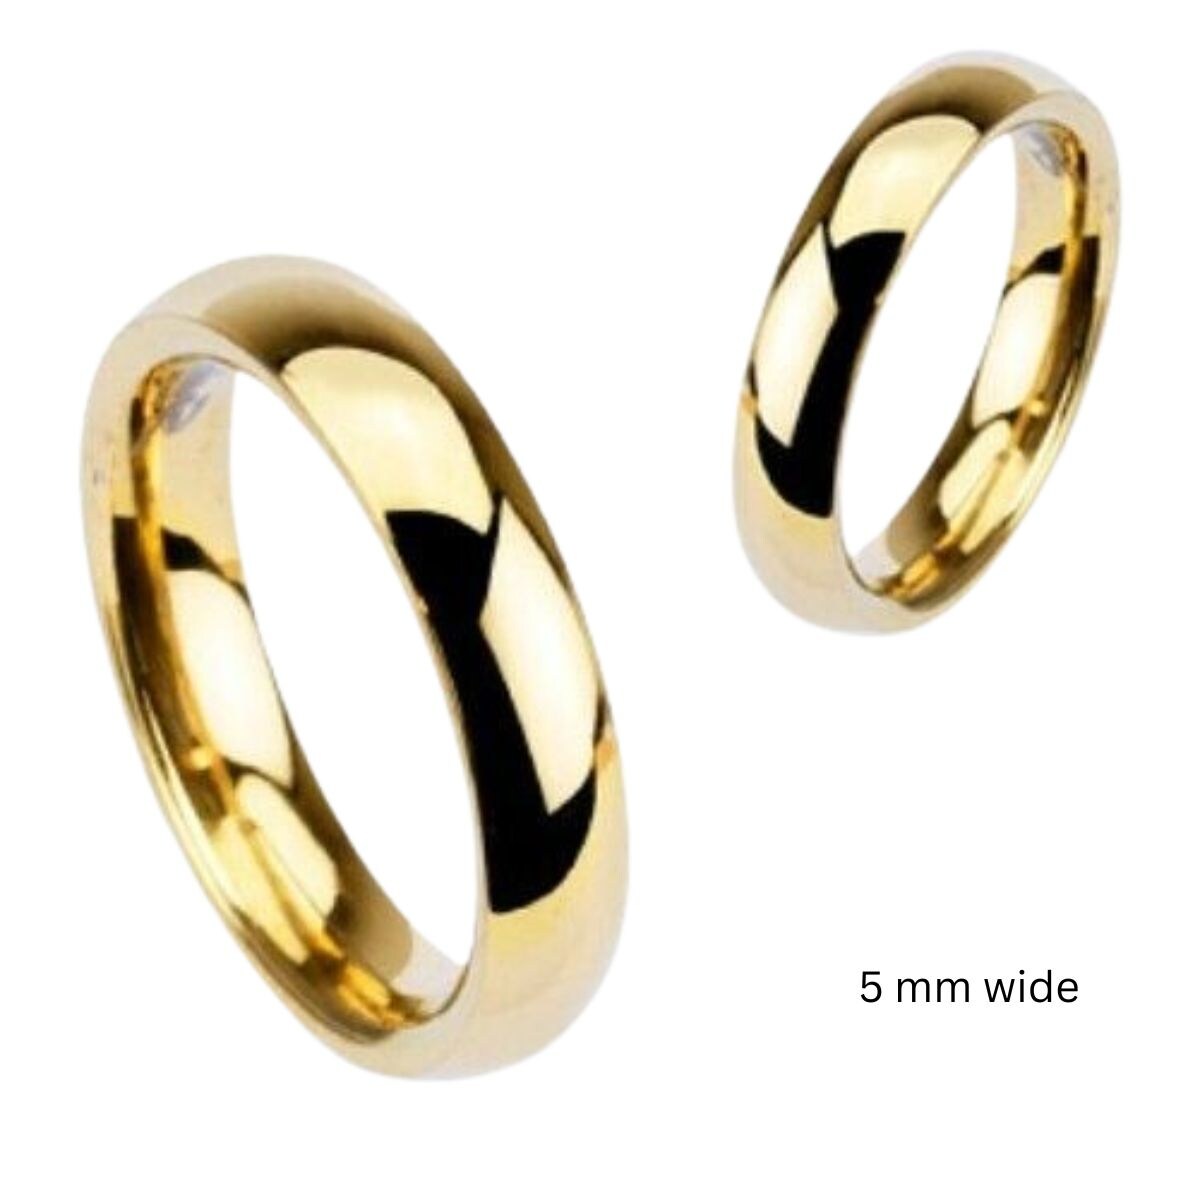 Highly Polished Stainless Steel Blank Ring Cfr3029 | Wholesale Jewelry  Website